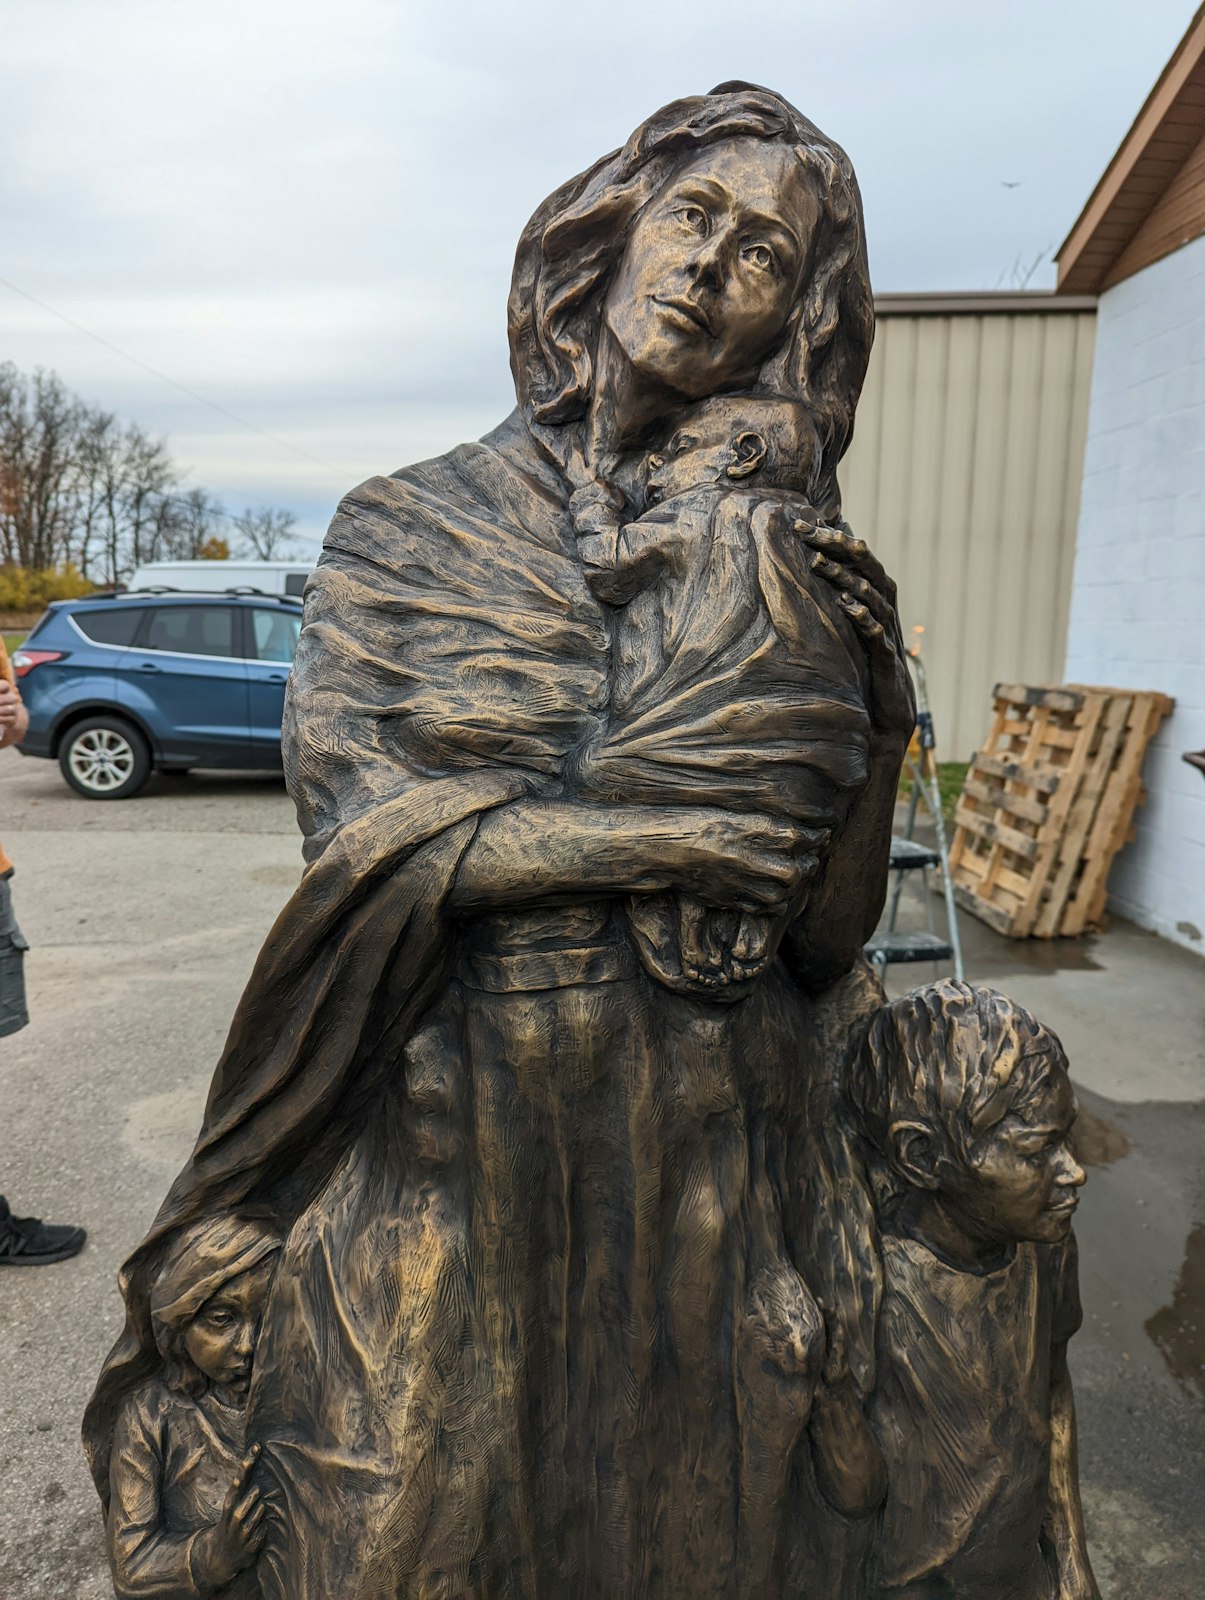 The statue will be installed in the bell tower garden behind the parish, near the entrance to the church from the parking lot. (Courtesy of Mary Dudek)